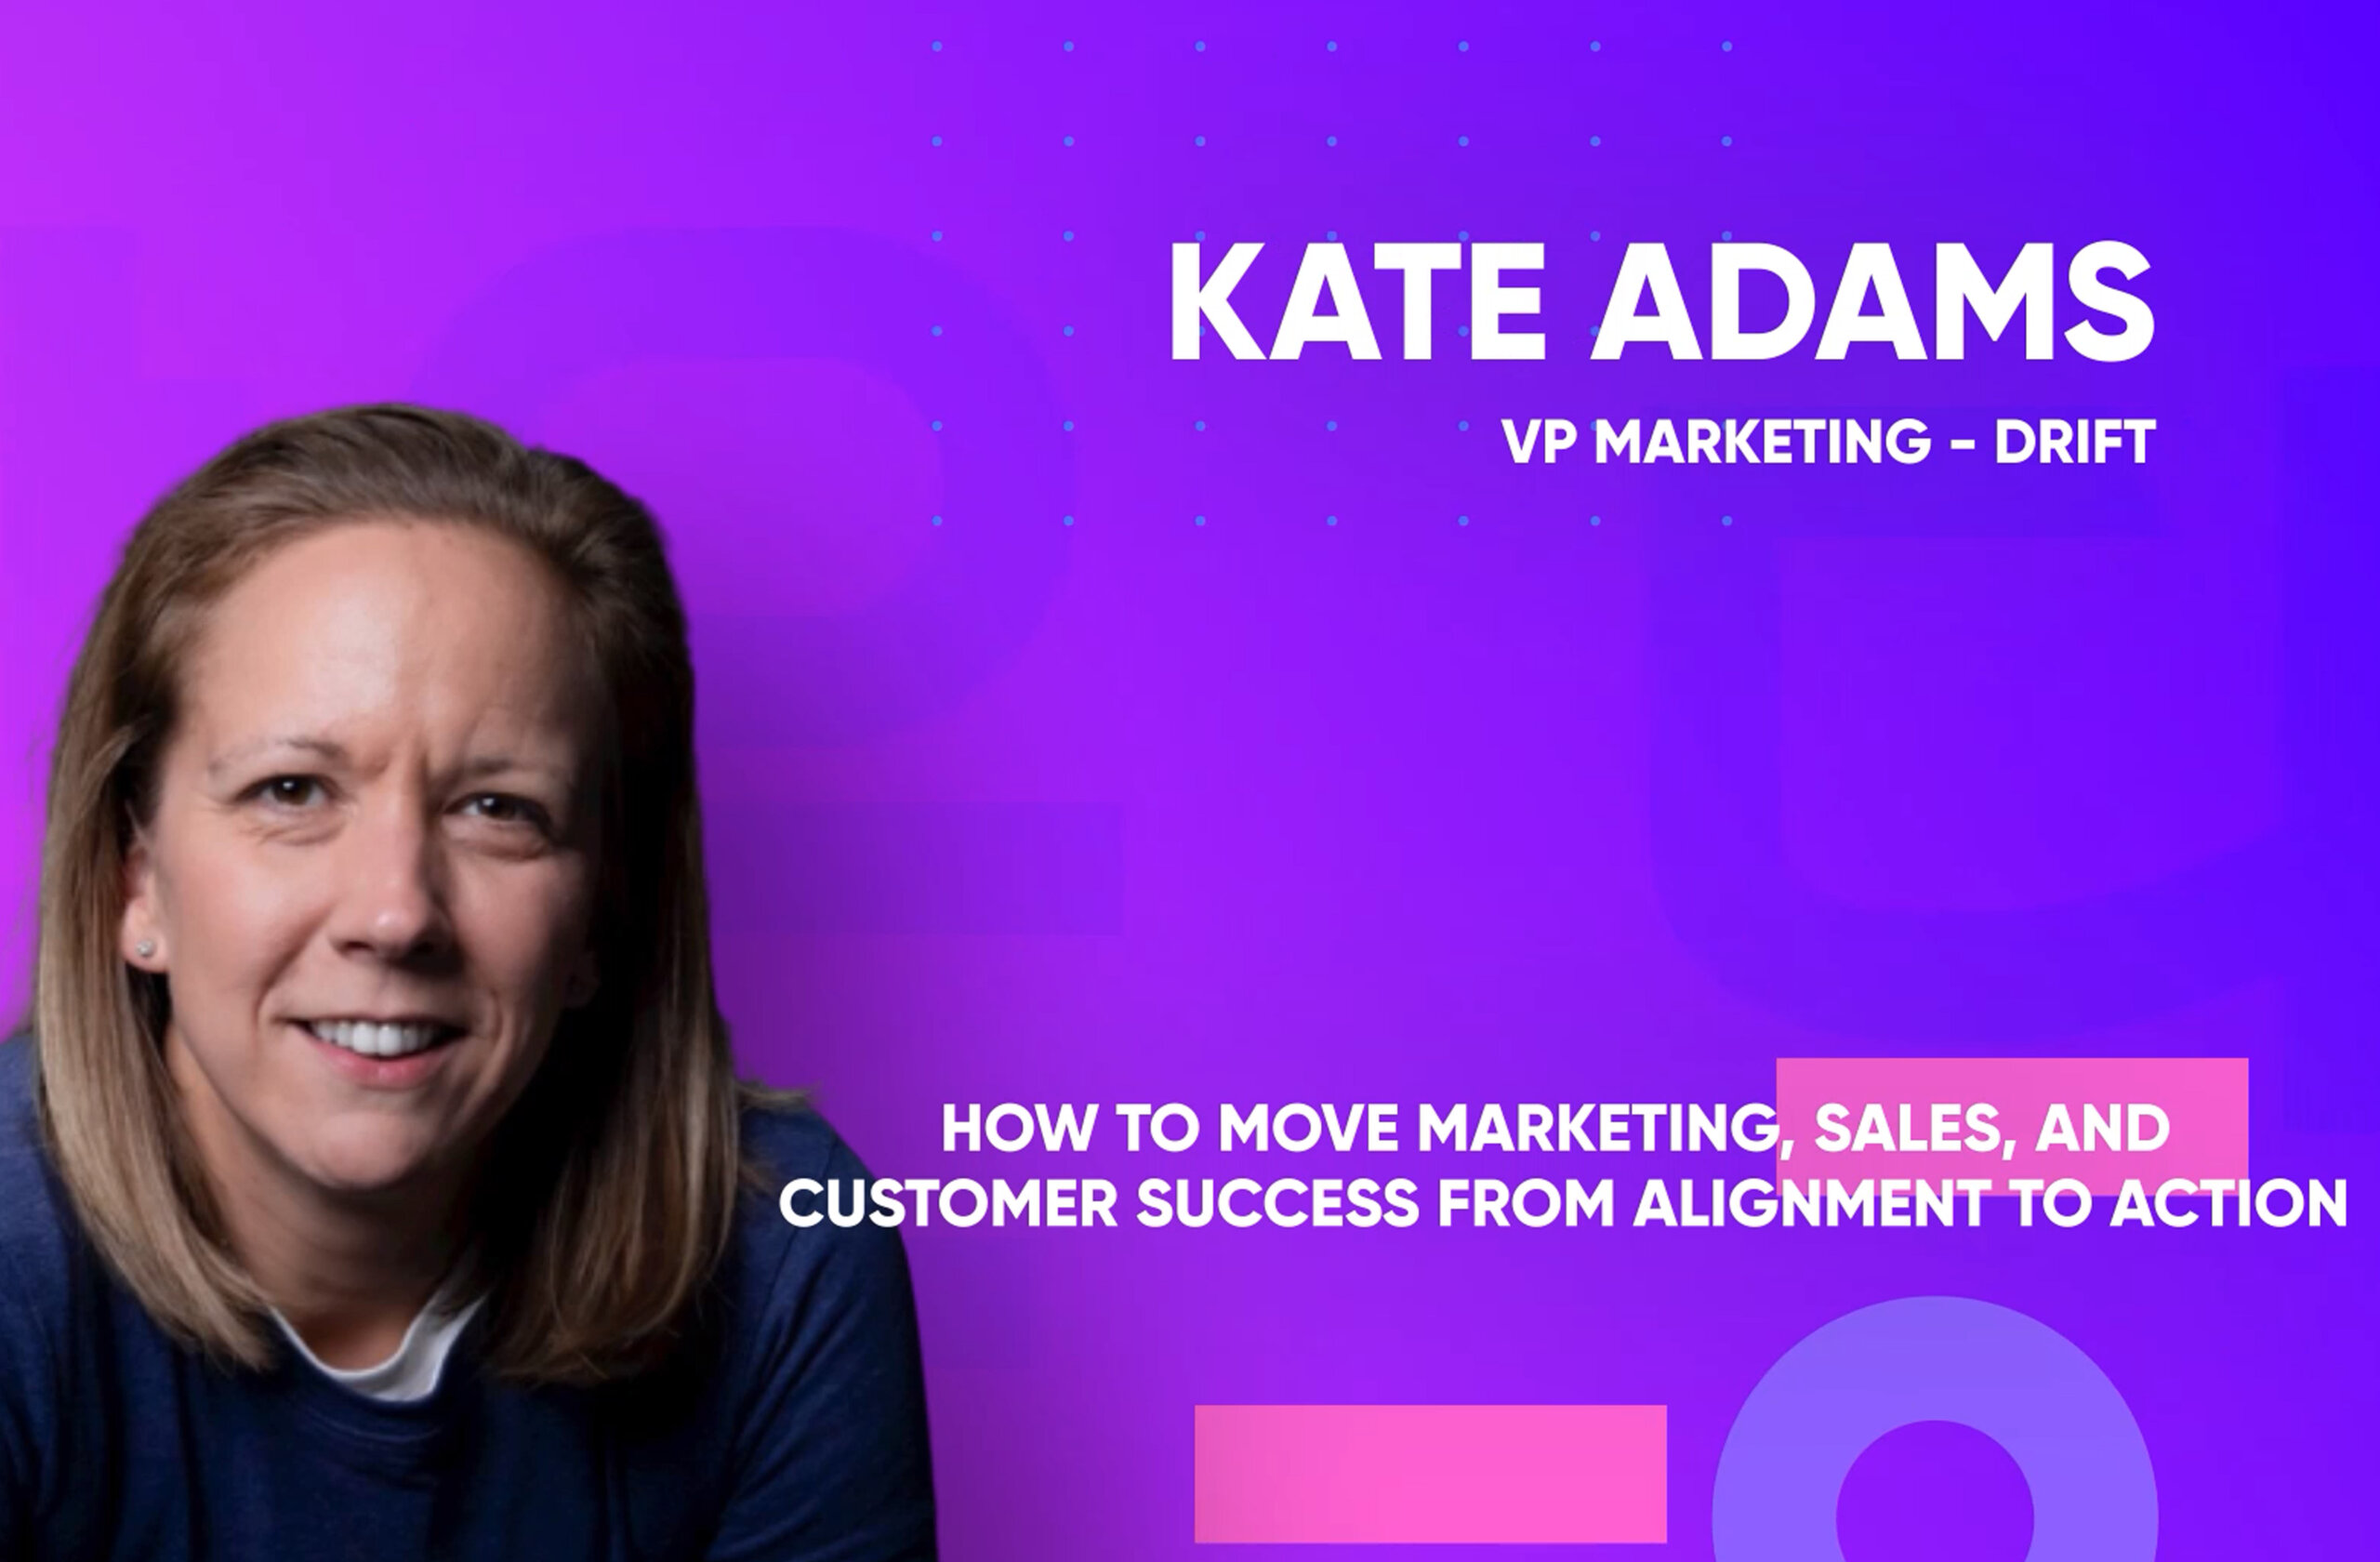 How to Move Marketing, Sales, and Customer Success from Alignment to Action? Kate Adams